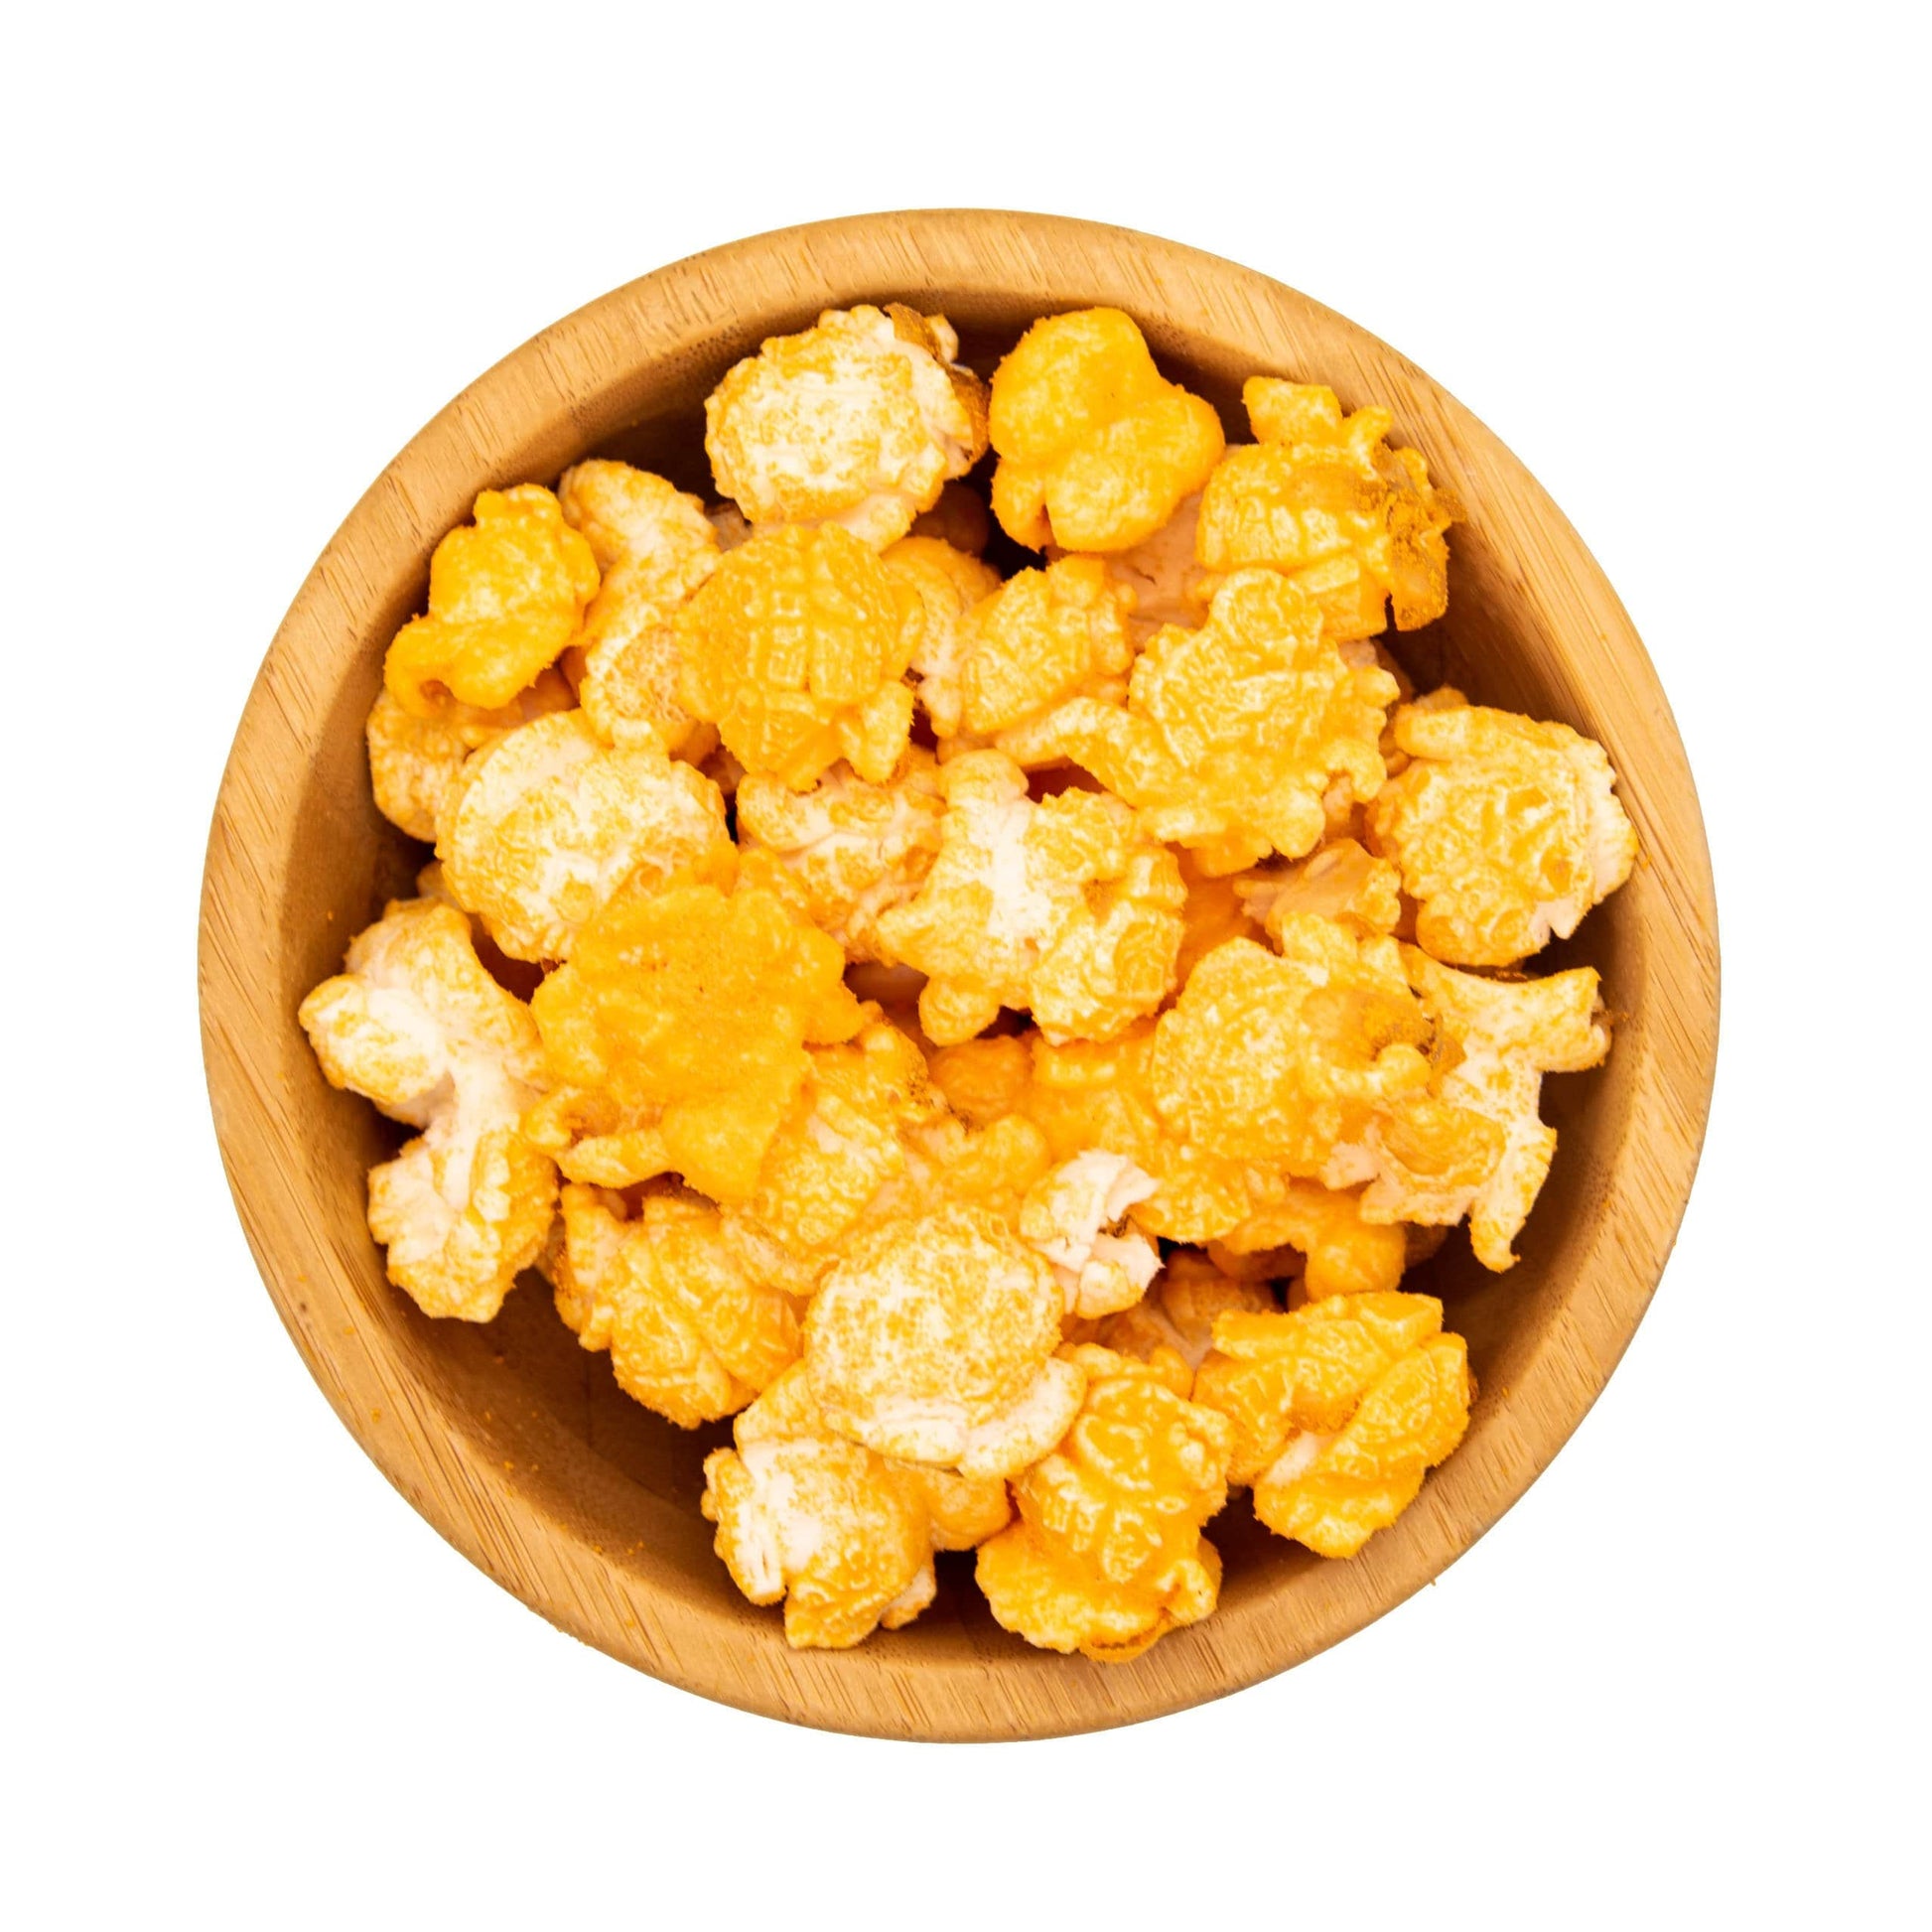 Creamy and salty gourmet popcorn best school fundraiser  with high profits 